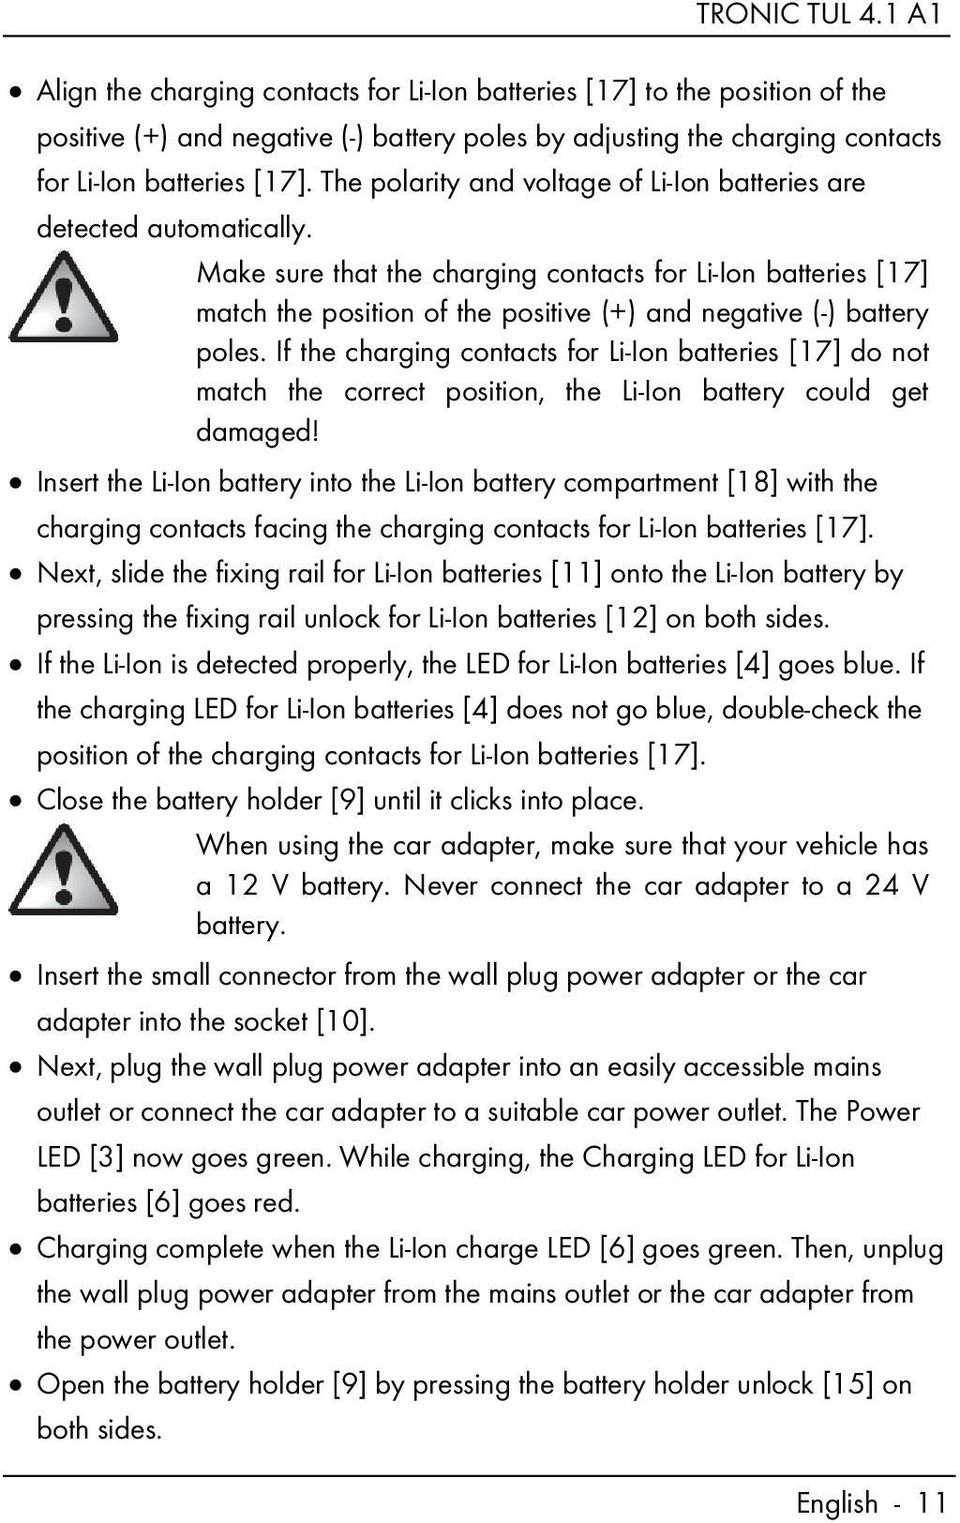 Make sure that the charging contacts for Li-Ion batteries [17] match the position of the positive (+) and negative (-) battery poles.